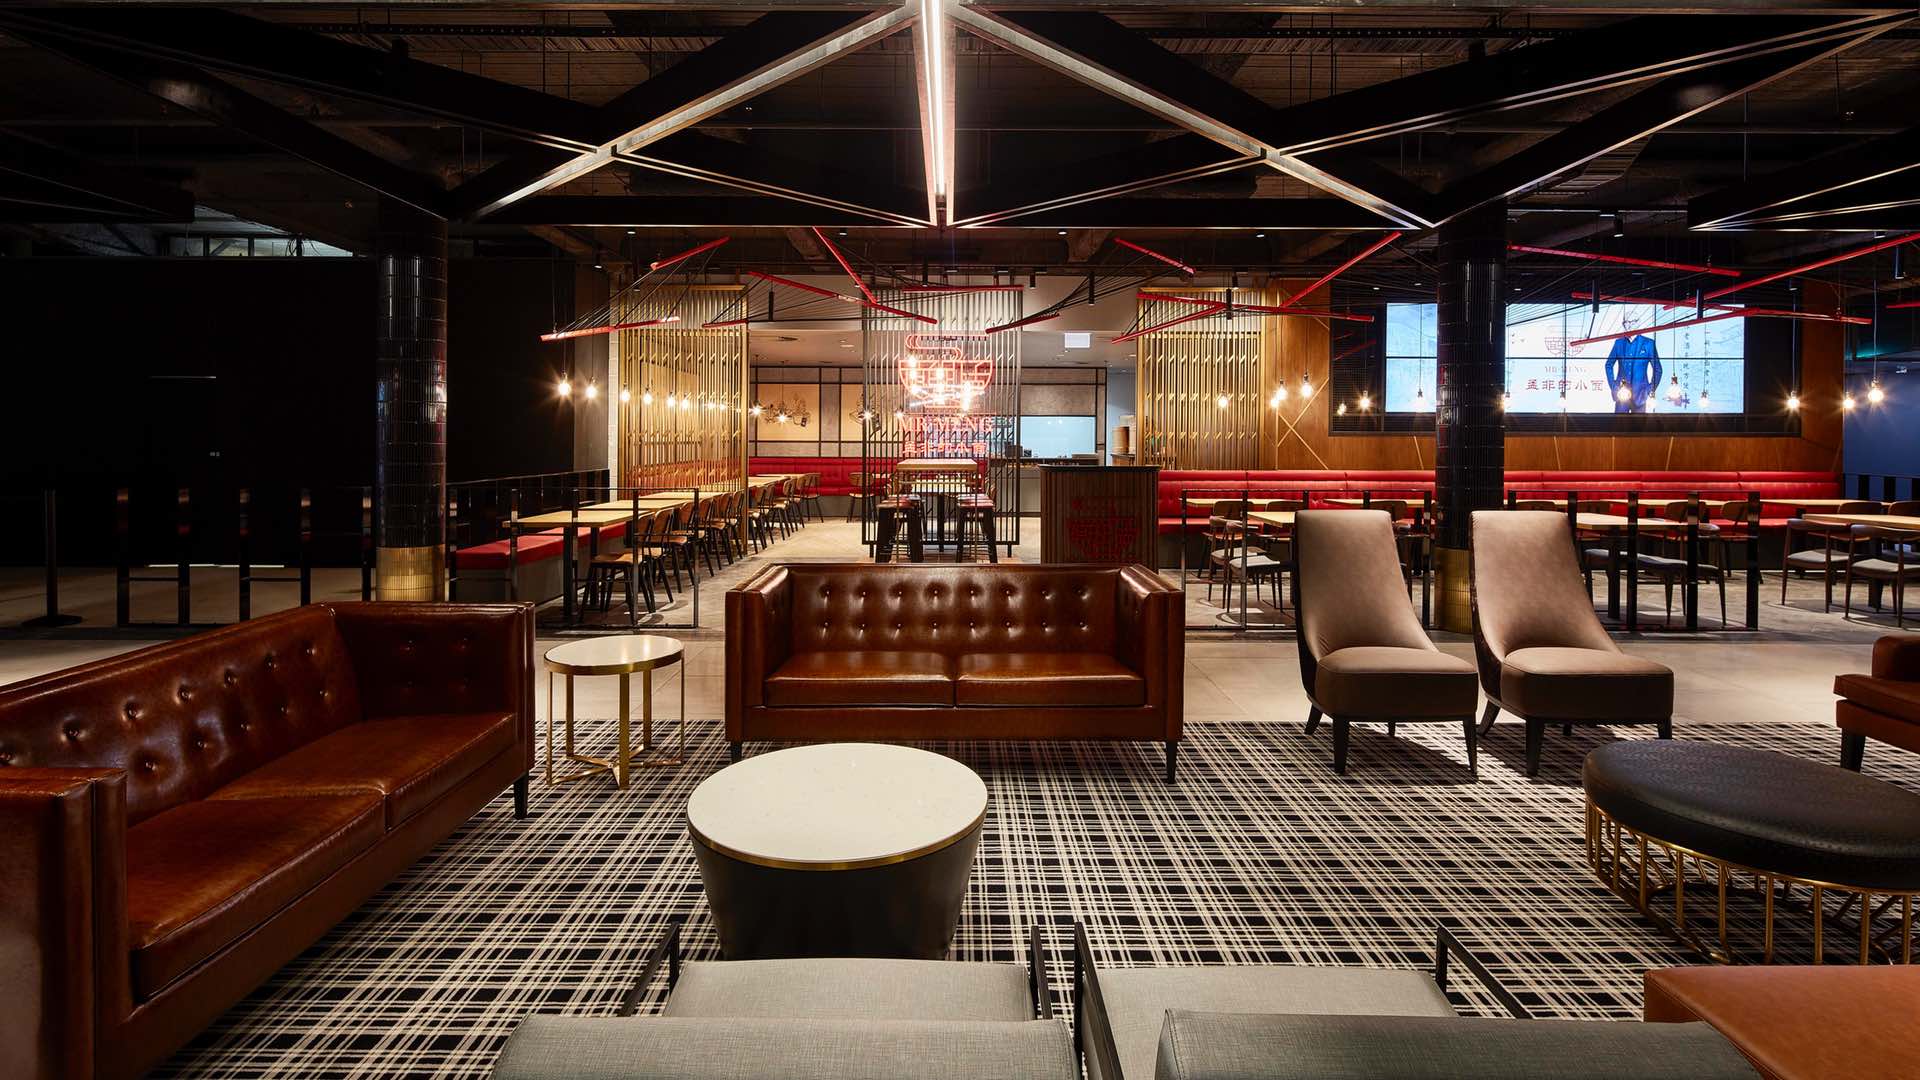 A New Asian Dining Precinct Has Opened on the Third Level of Market City